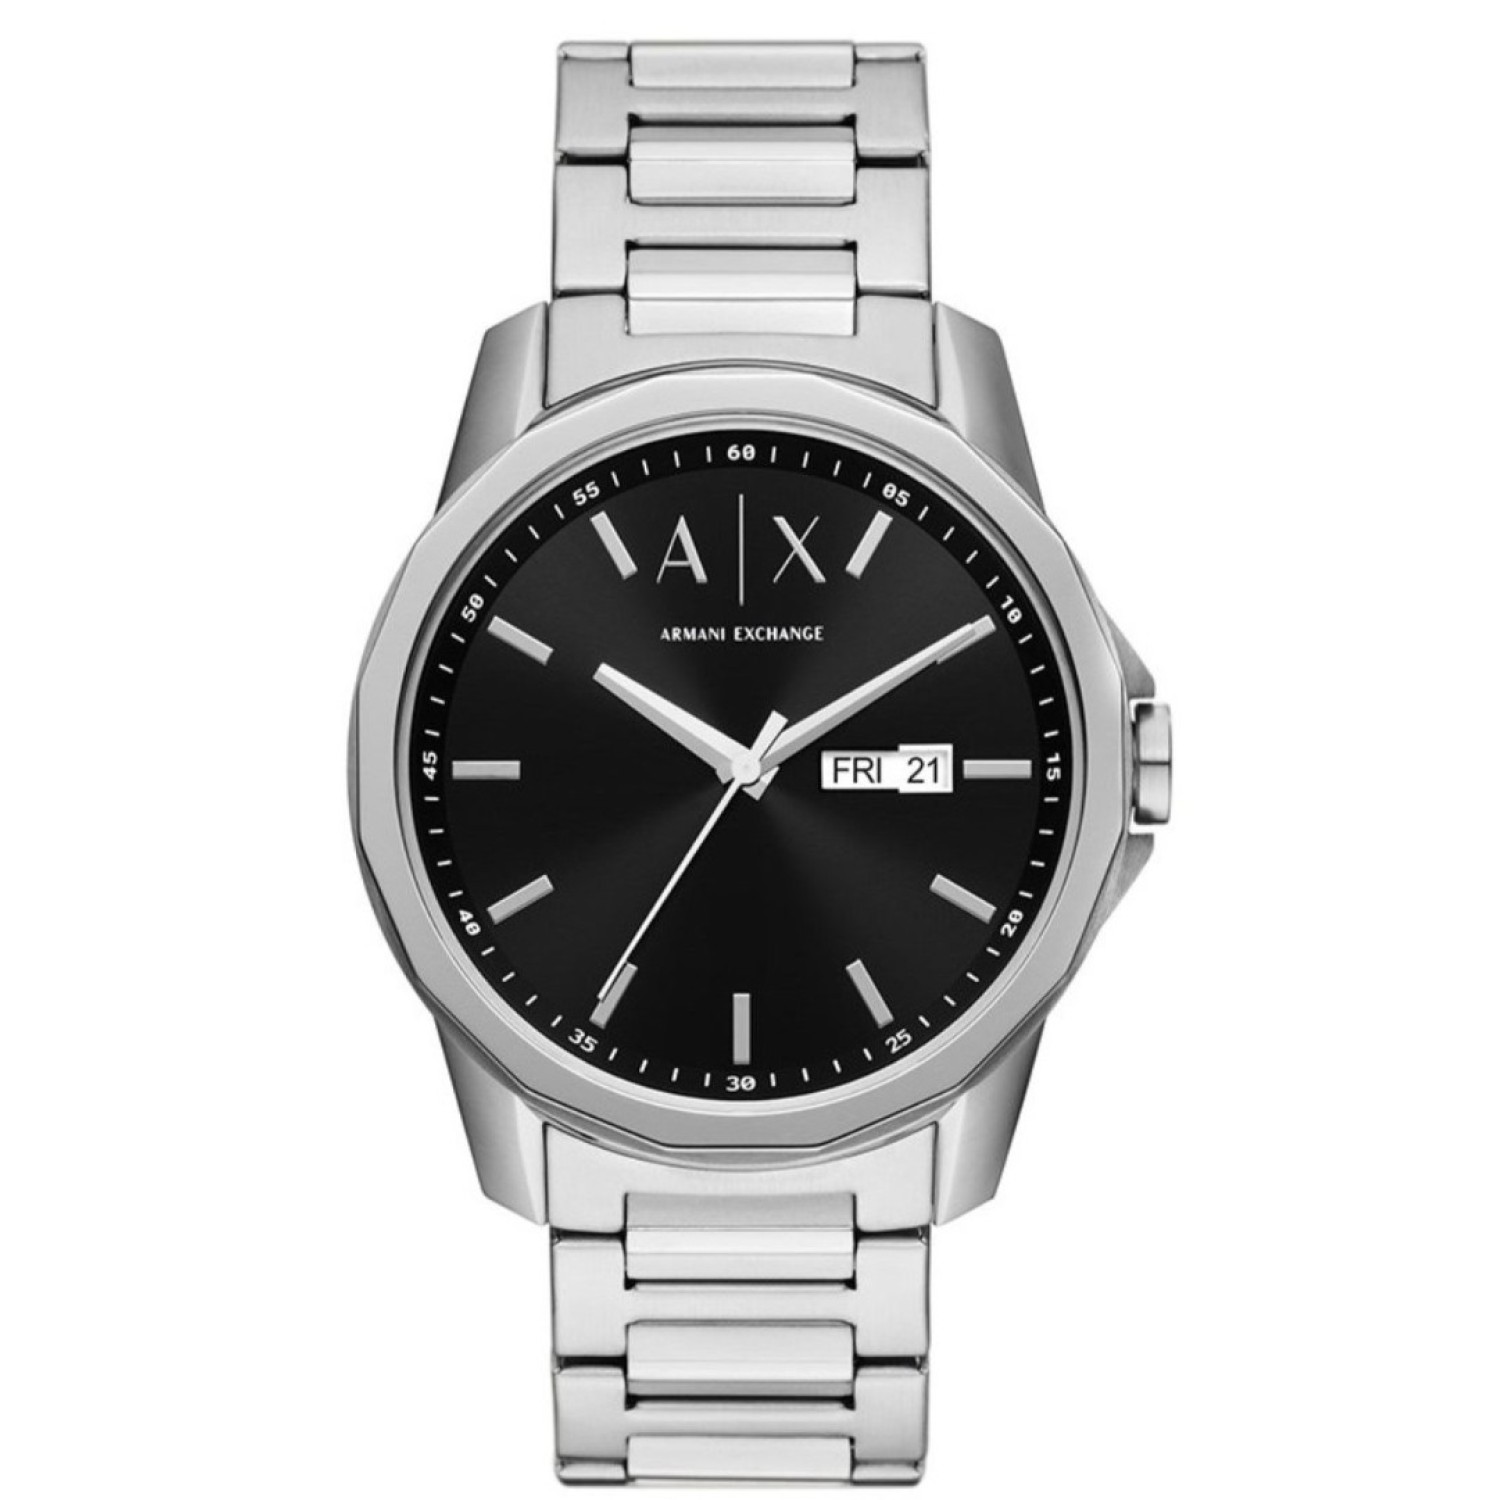 AX1733 A|X Armani Exchange. The Armani Exchange Men's Watch AX1733 is a stylish and elegant timepiece designed for the modern man.